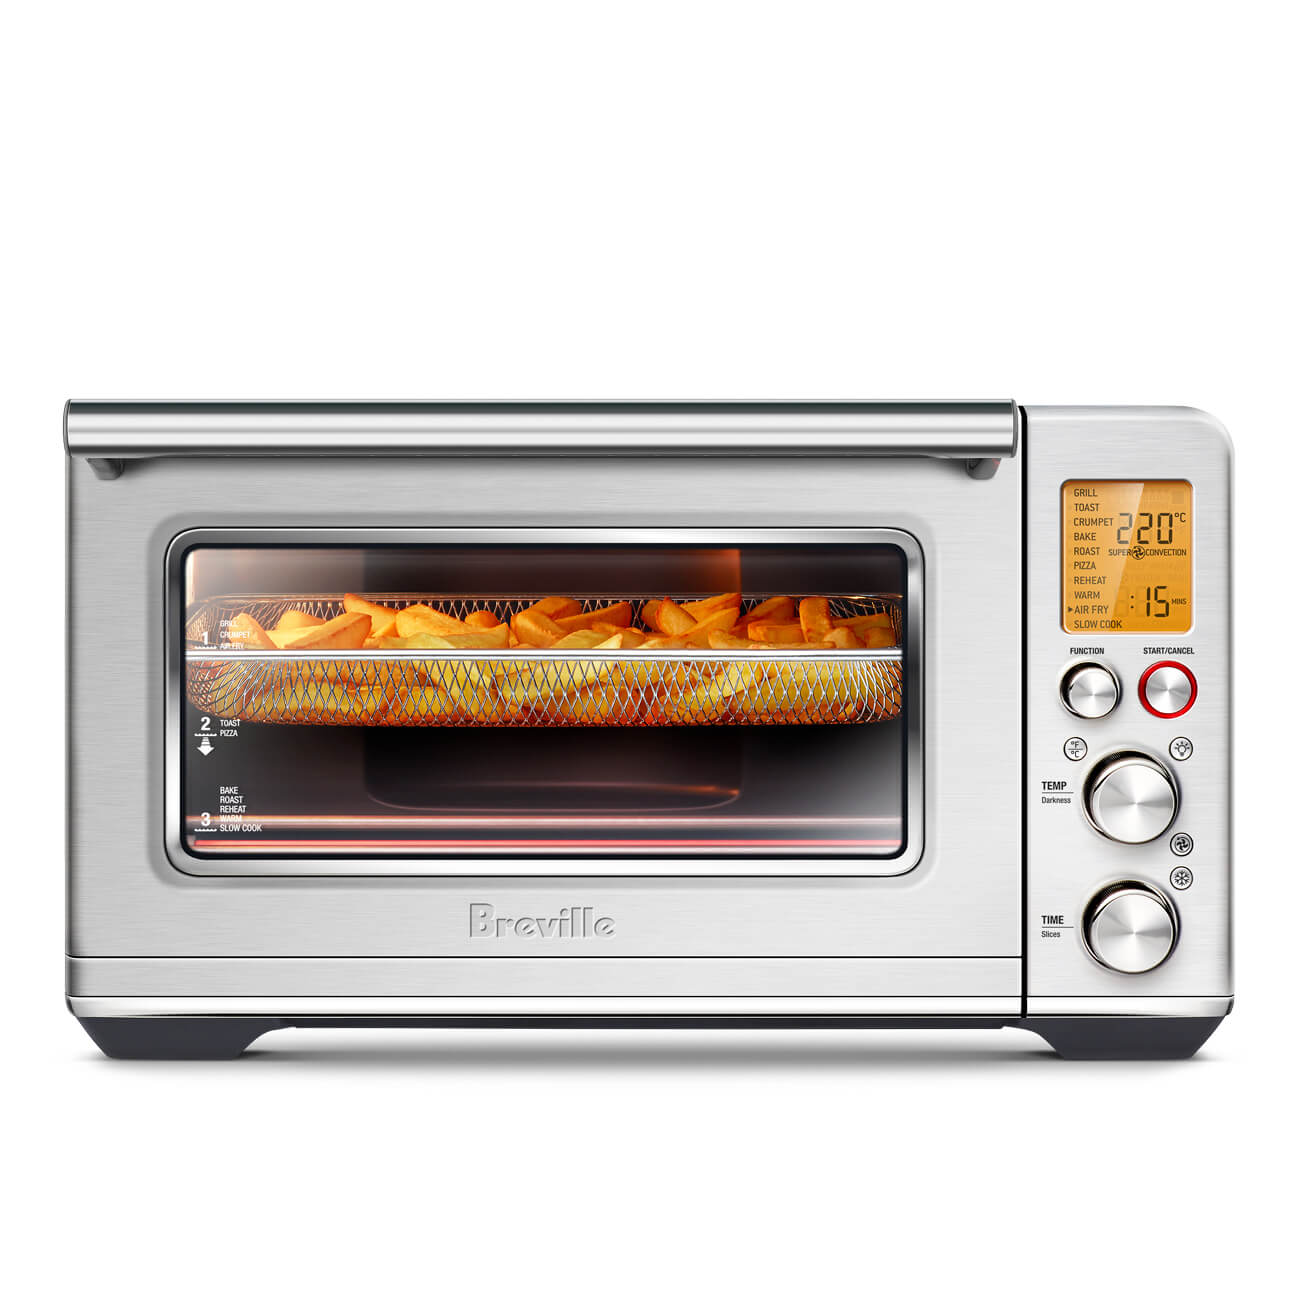 The Smart Oven Air Fryer Toaster Oven Breville